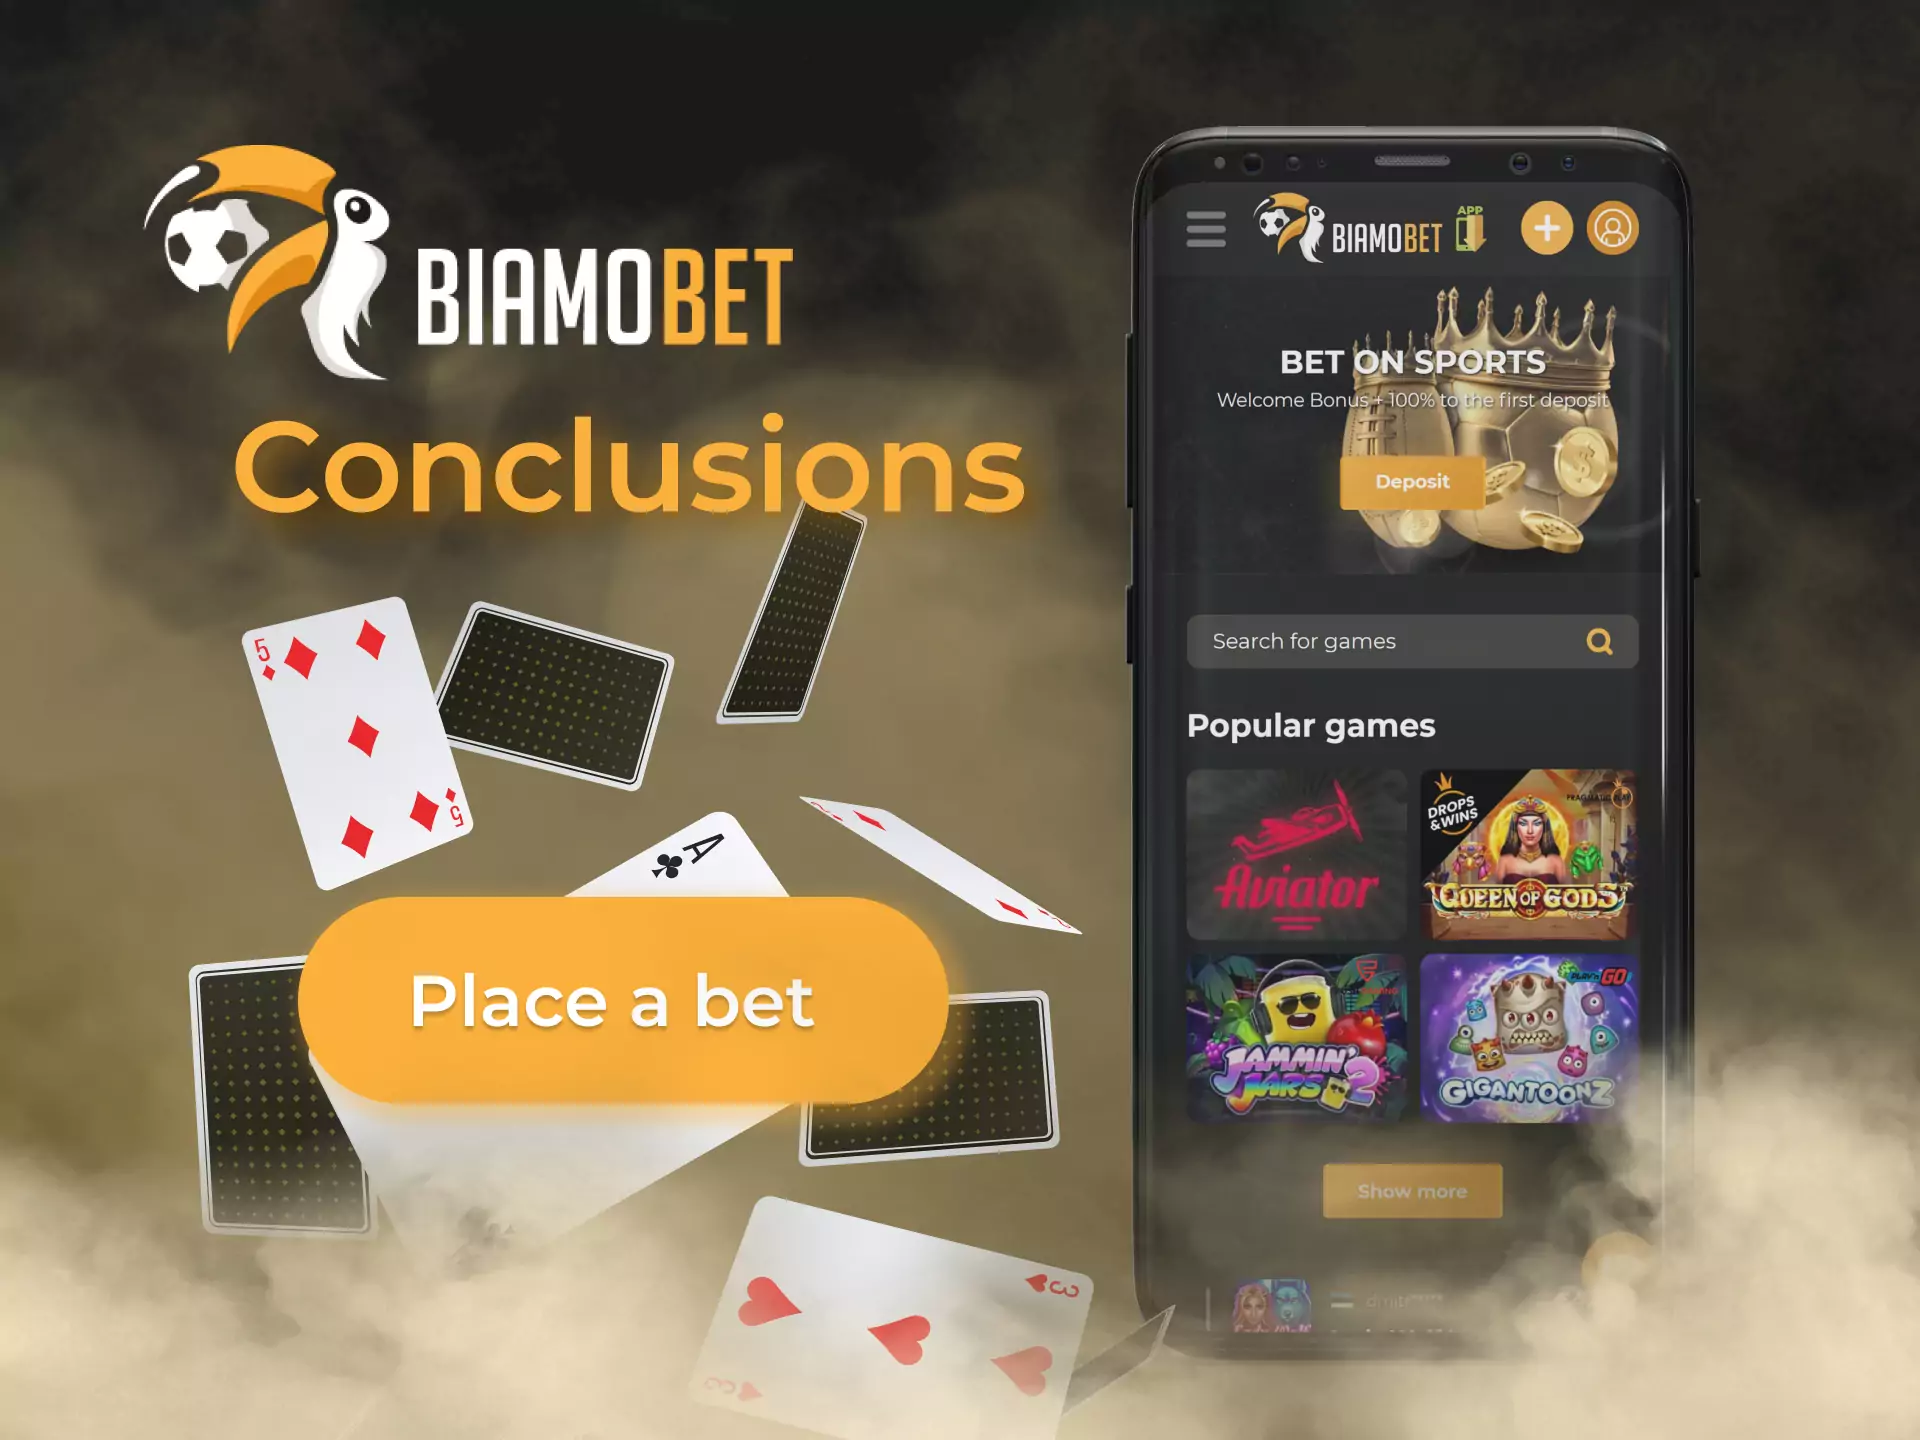 In the Biamobet app, you find great features, amazing casino games and good odds for betting.